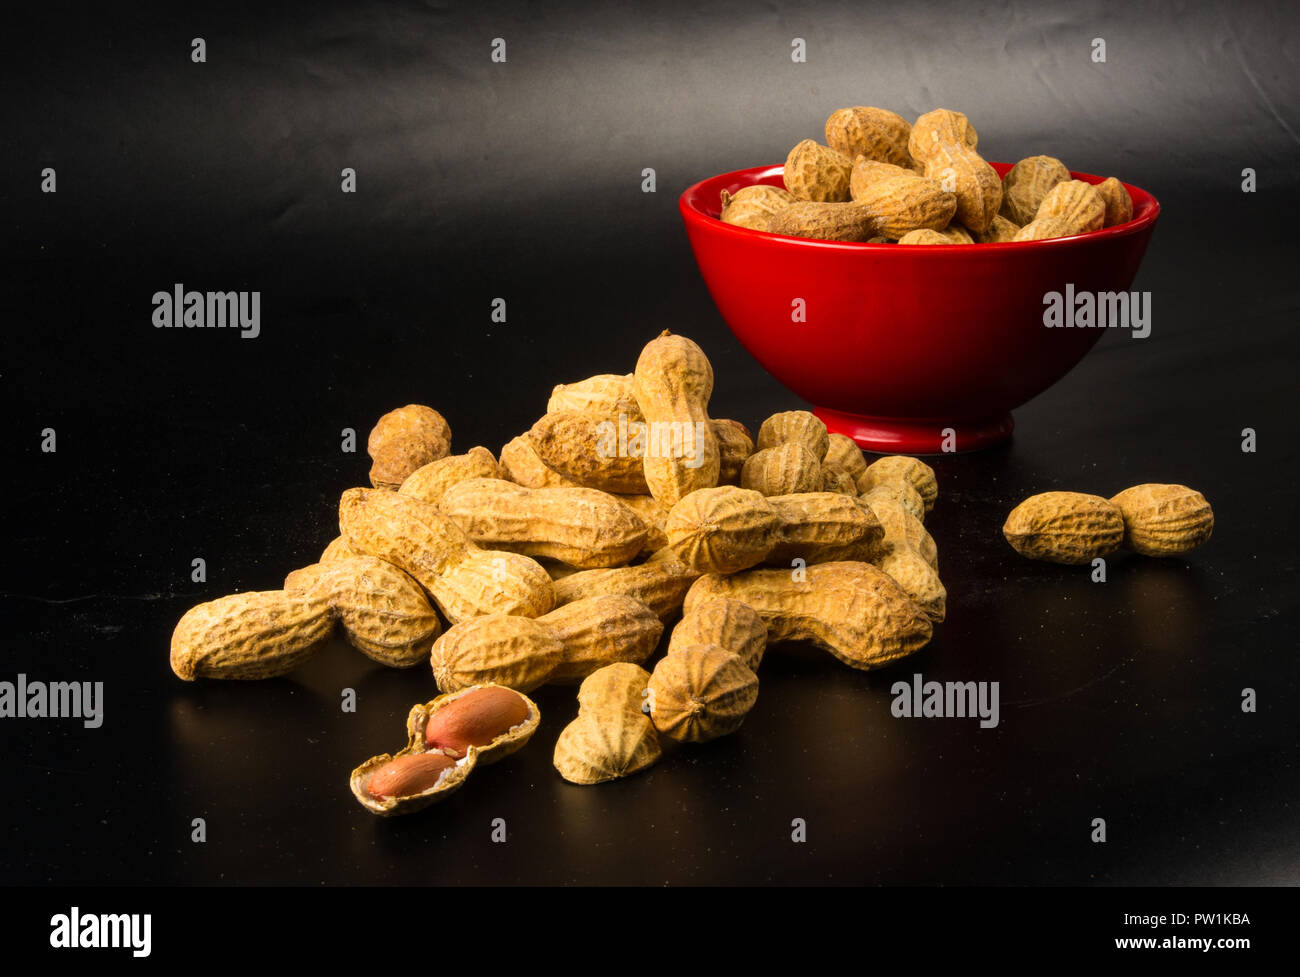 Peanuts, Arachis hypogaea, in shell on dark background, close up, selective focus Stock Photo